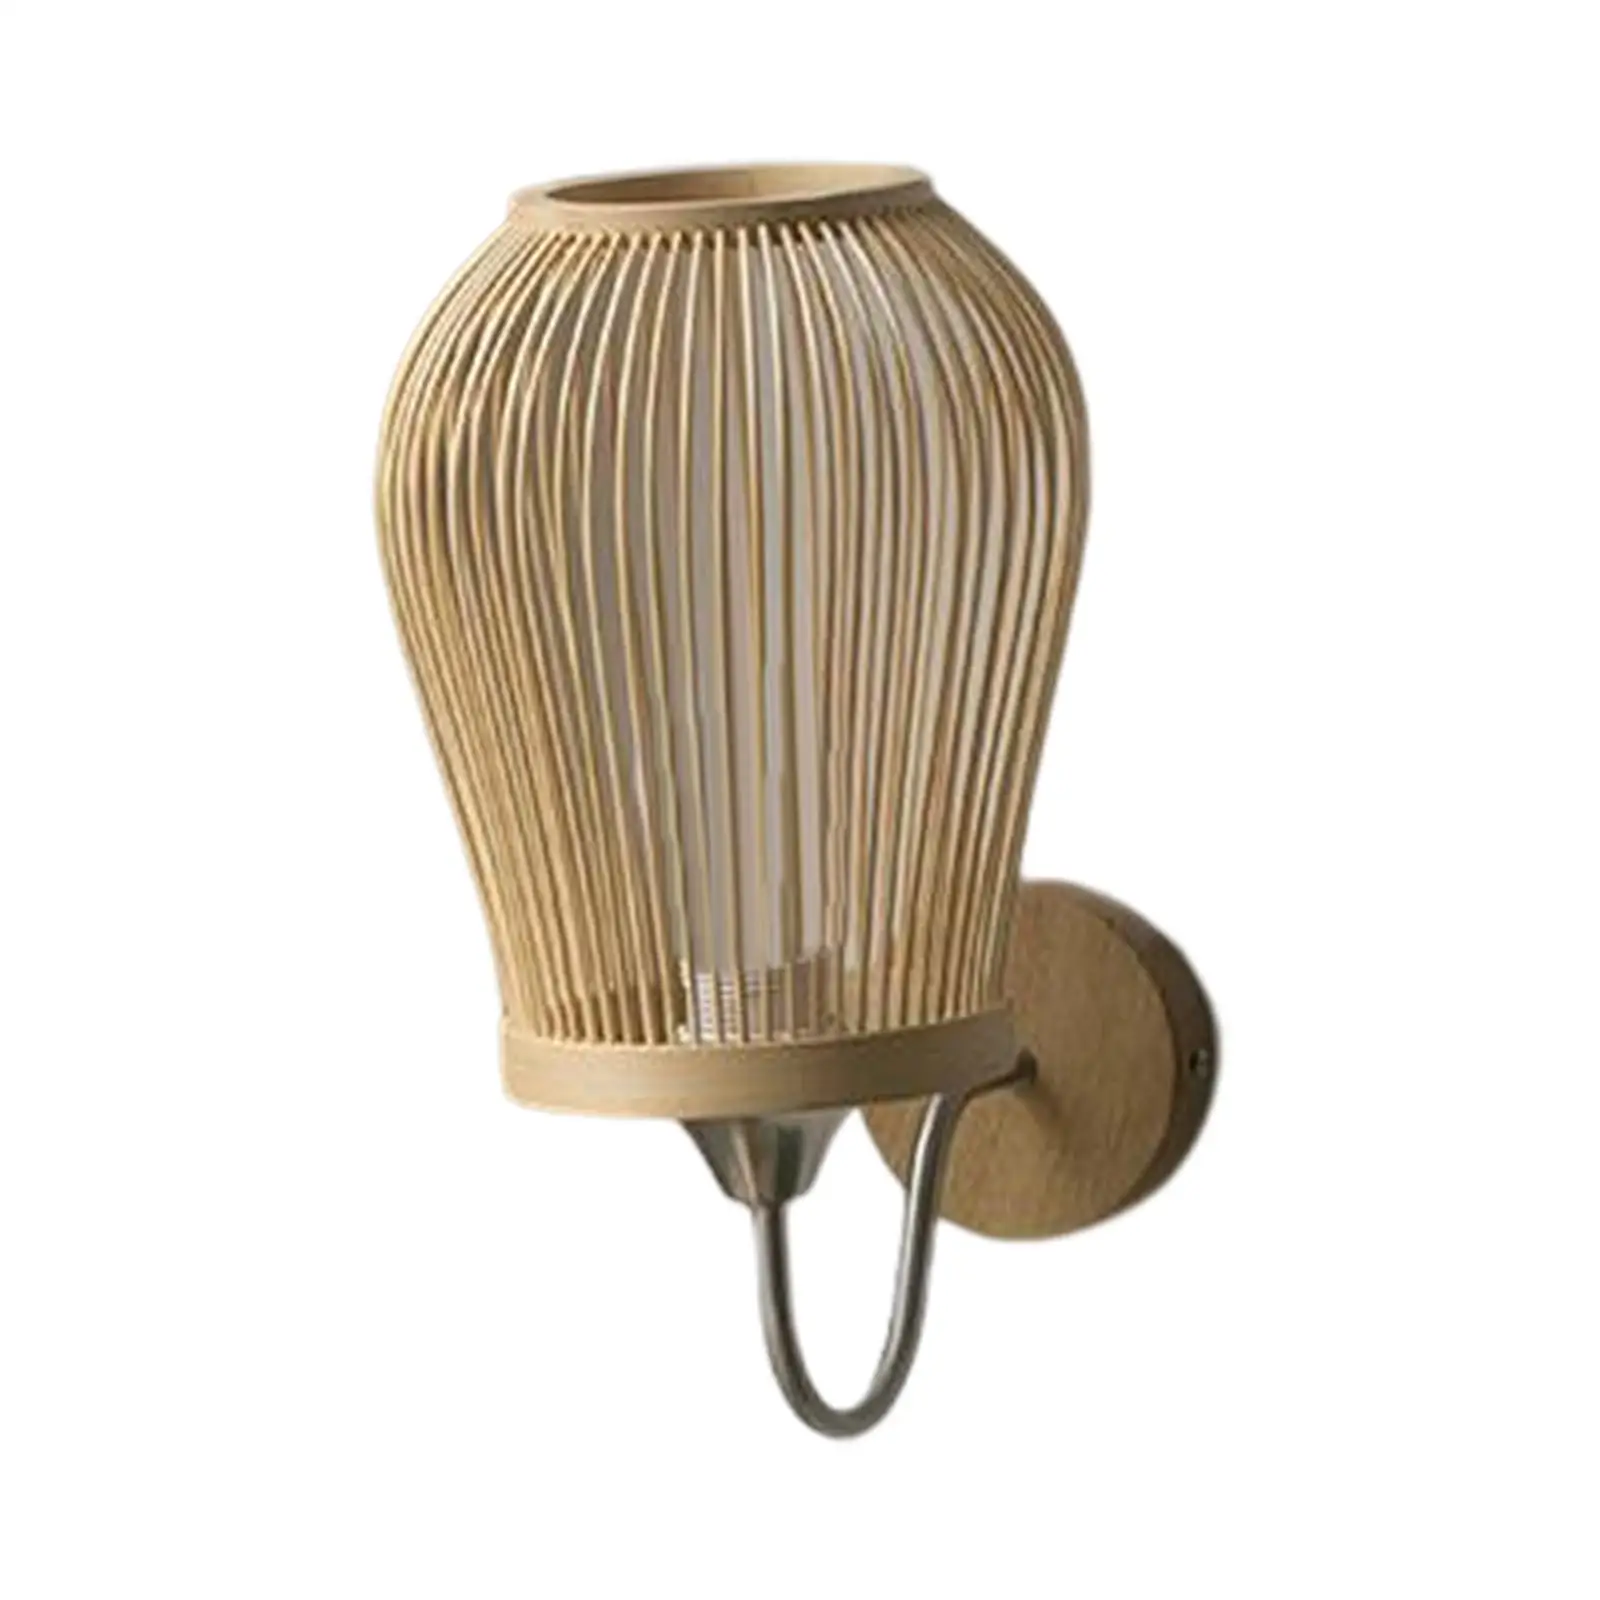 Bamboo Wall Mounted Sconce Lamp Light E27 Base Lighting Retro Style Farmhouse Decorative for Kitchen Study Home Bedroom